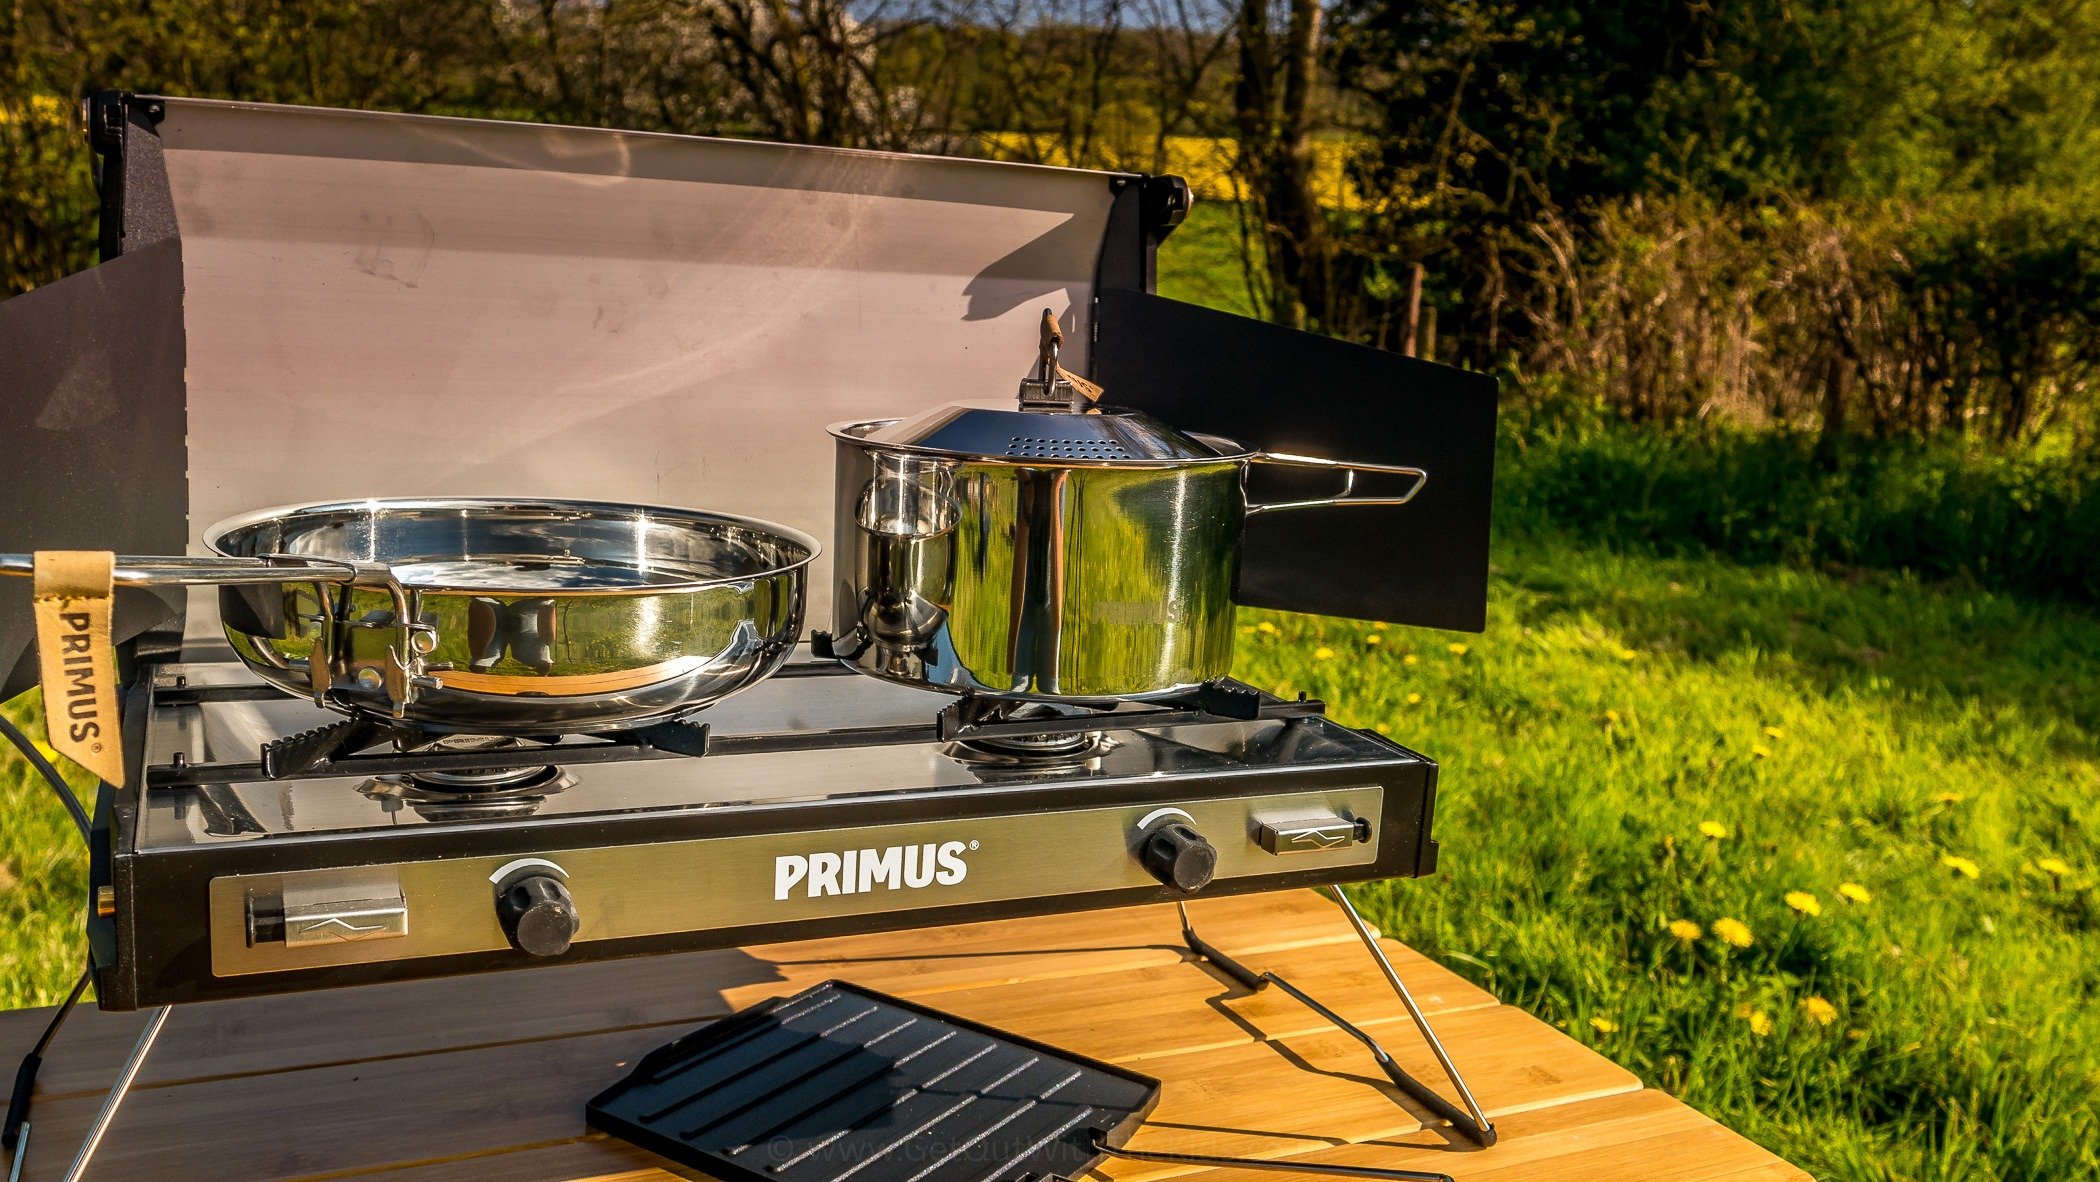 The polished stainless steel of the campfire cookset